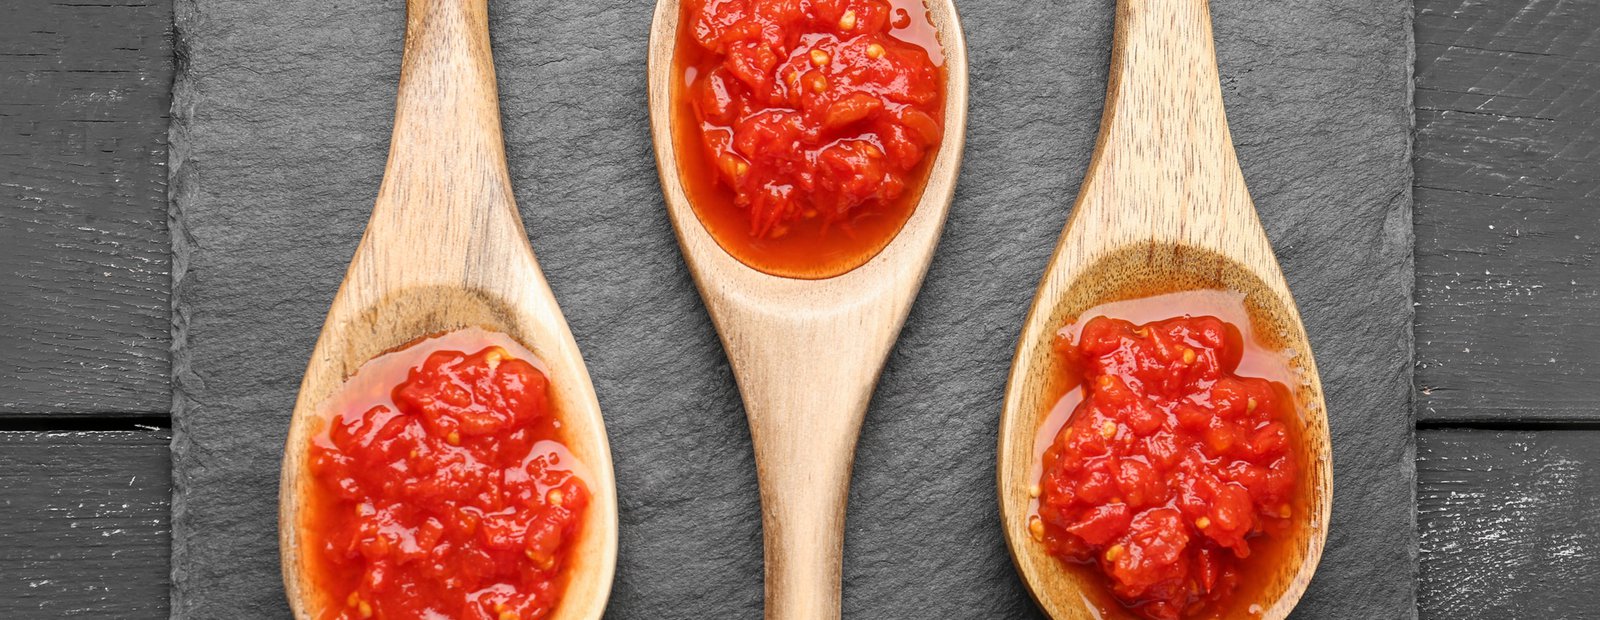 The history of tomato sauce: Arab and Italian traditions